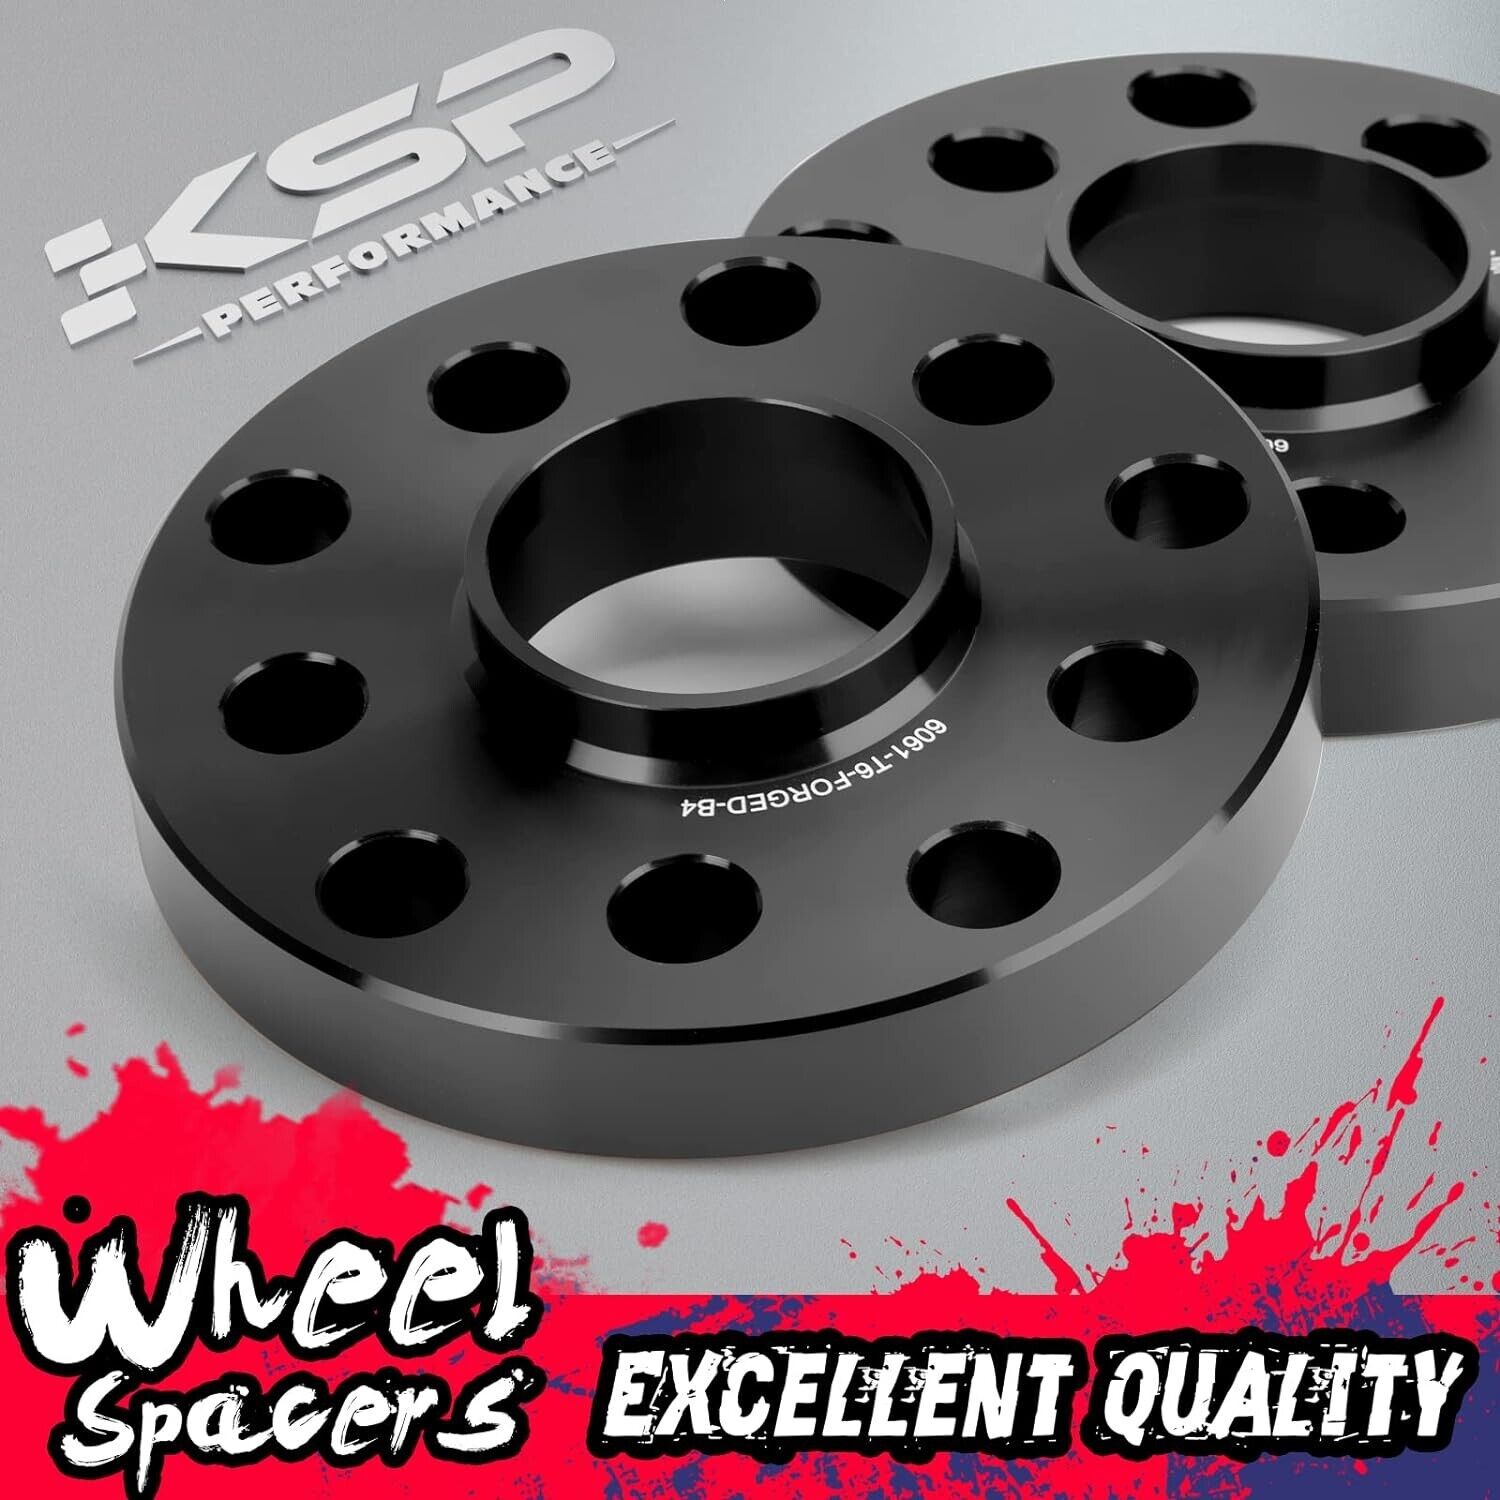 15mm Wheel Spacers Compatible with Audi A3 A4 A6 A8 S4 S6 S8 Quattro TT 5x100